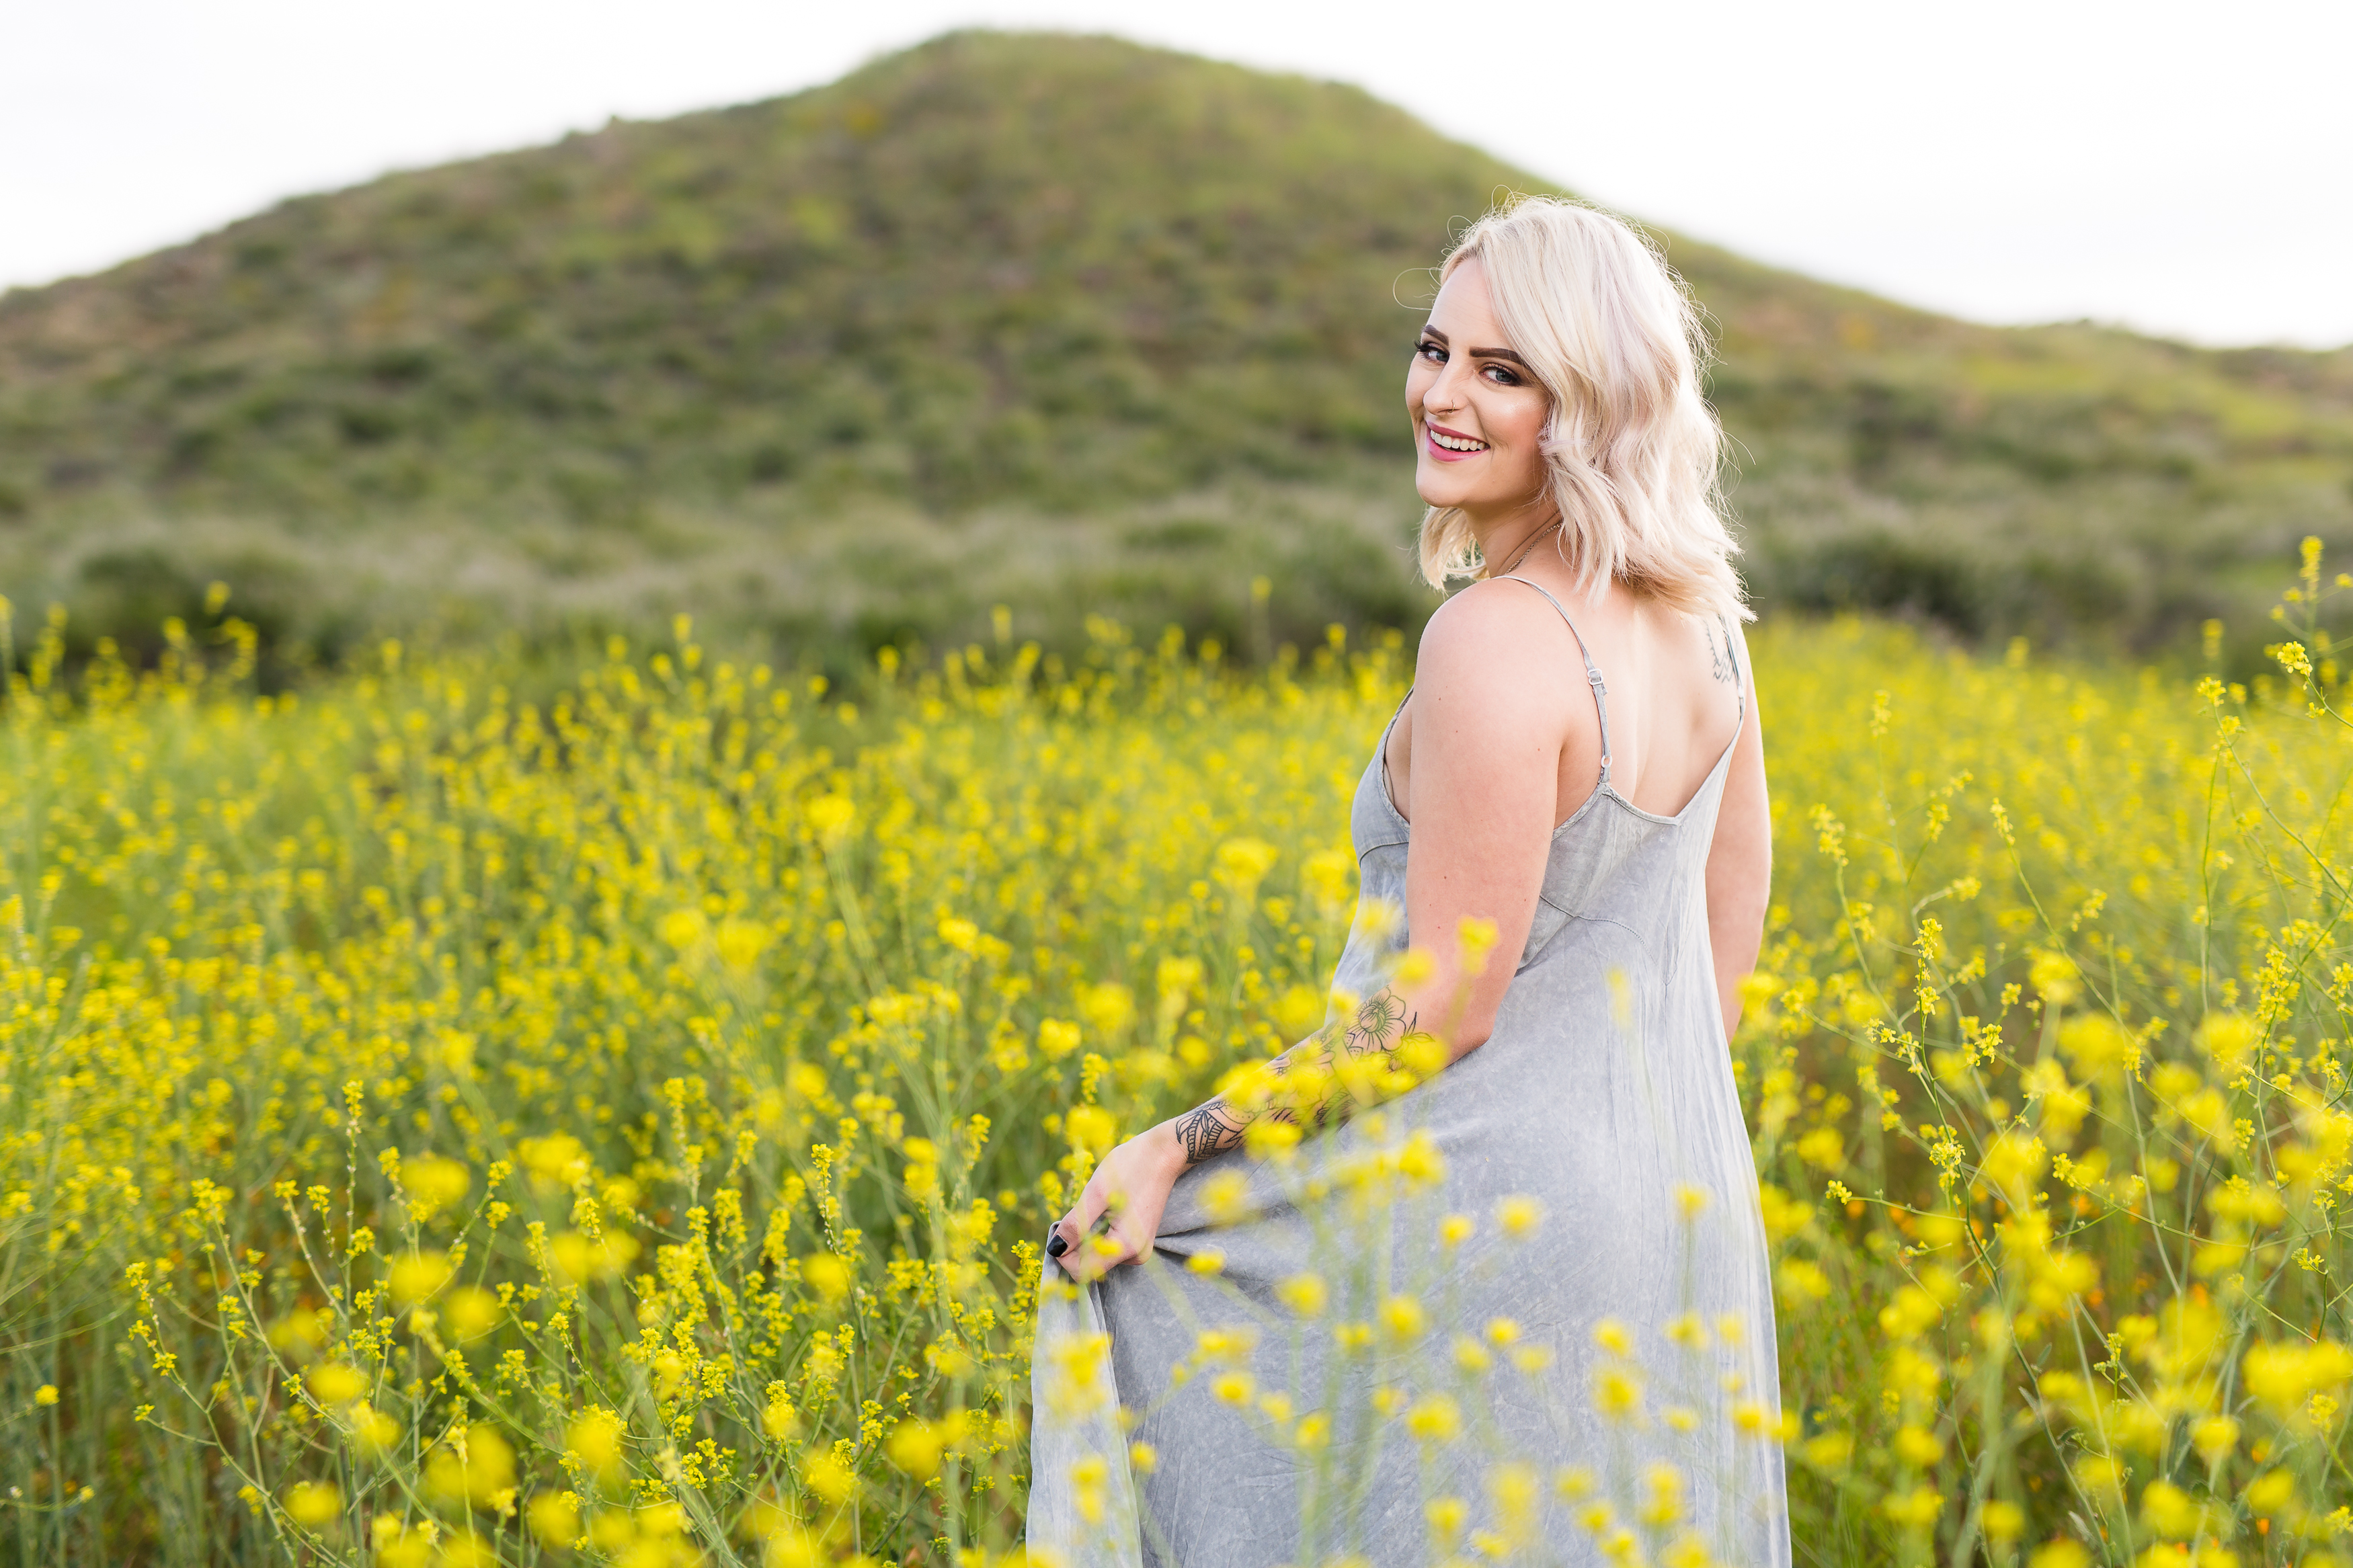 Woman walking through field of flowers towards green hill looking back and smiling